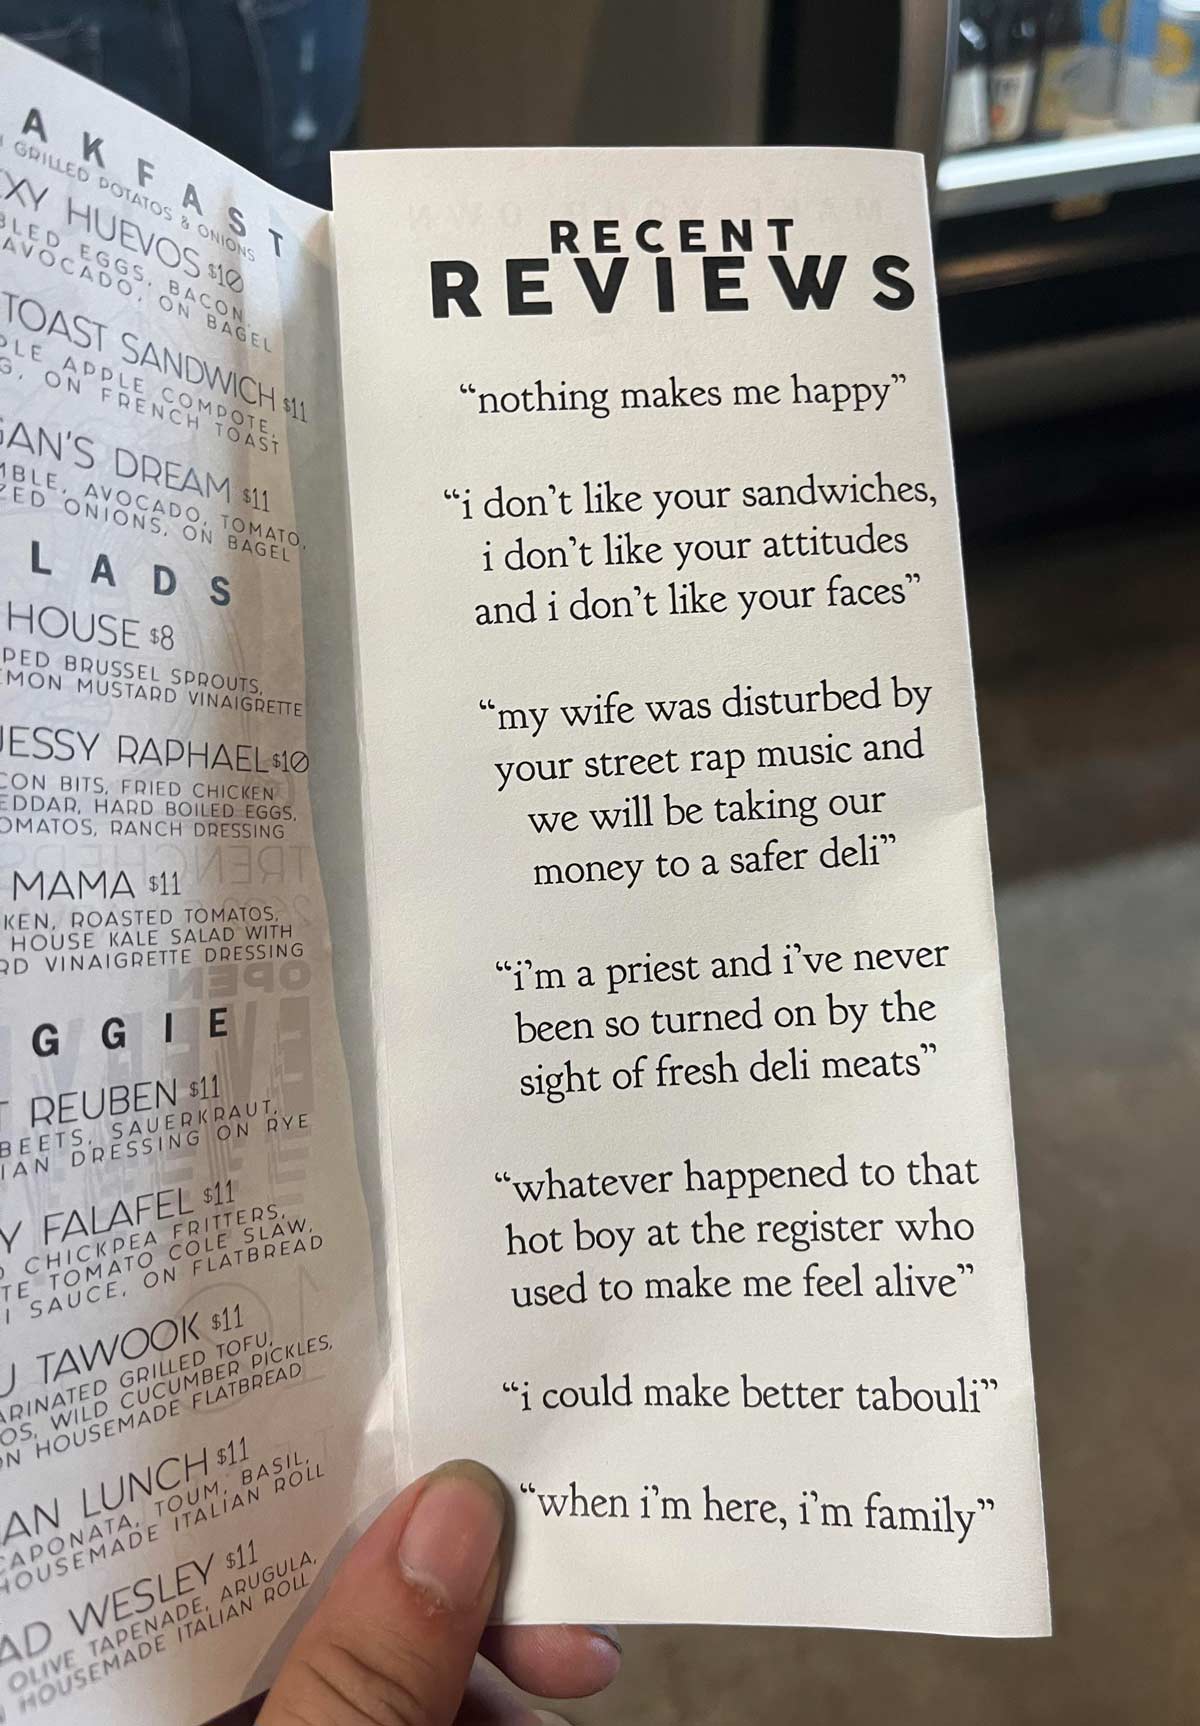 This deli has some interesting recent "reviews"